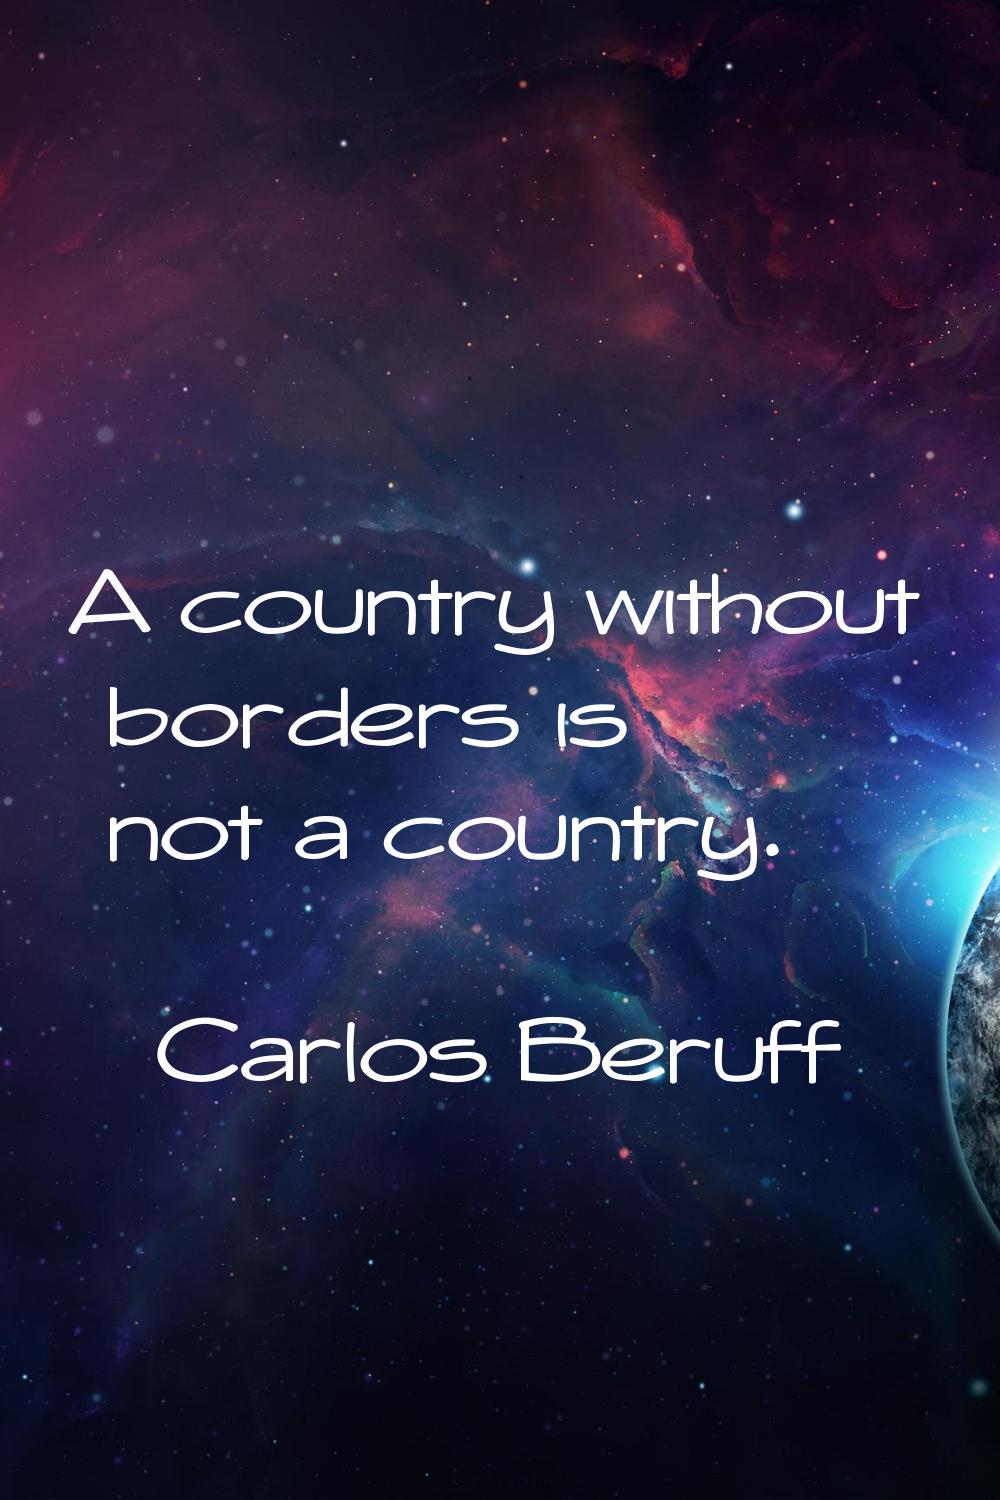 A country without borders is not a country.